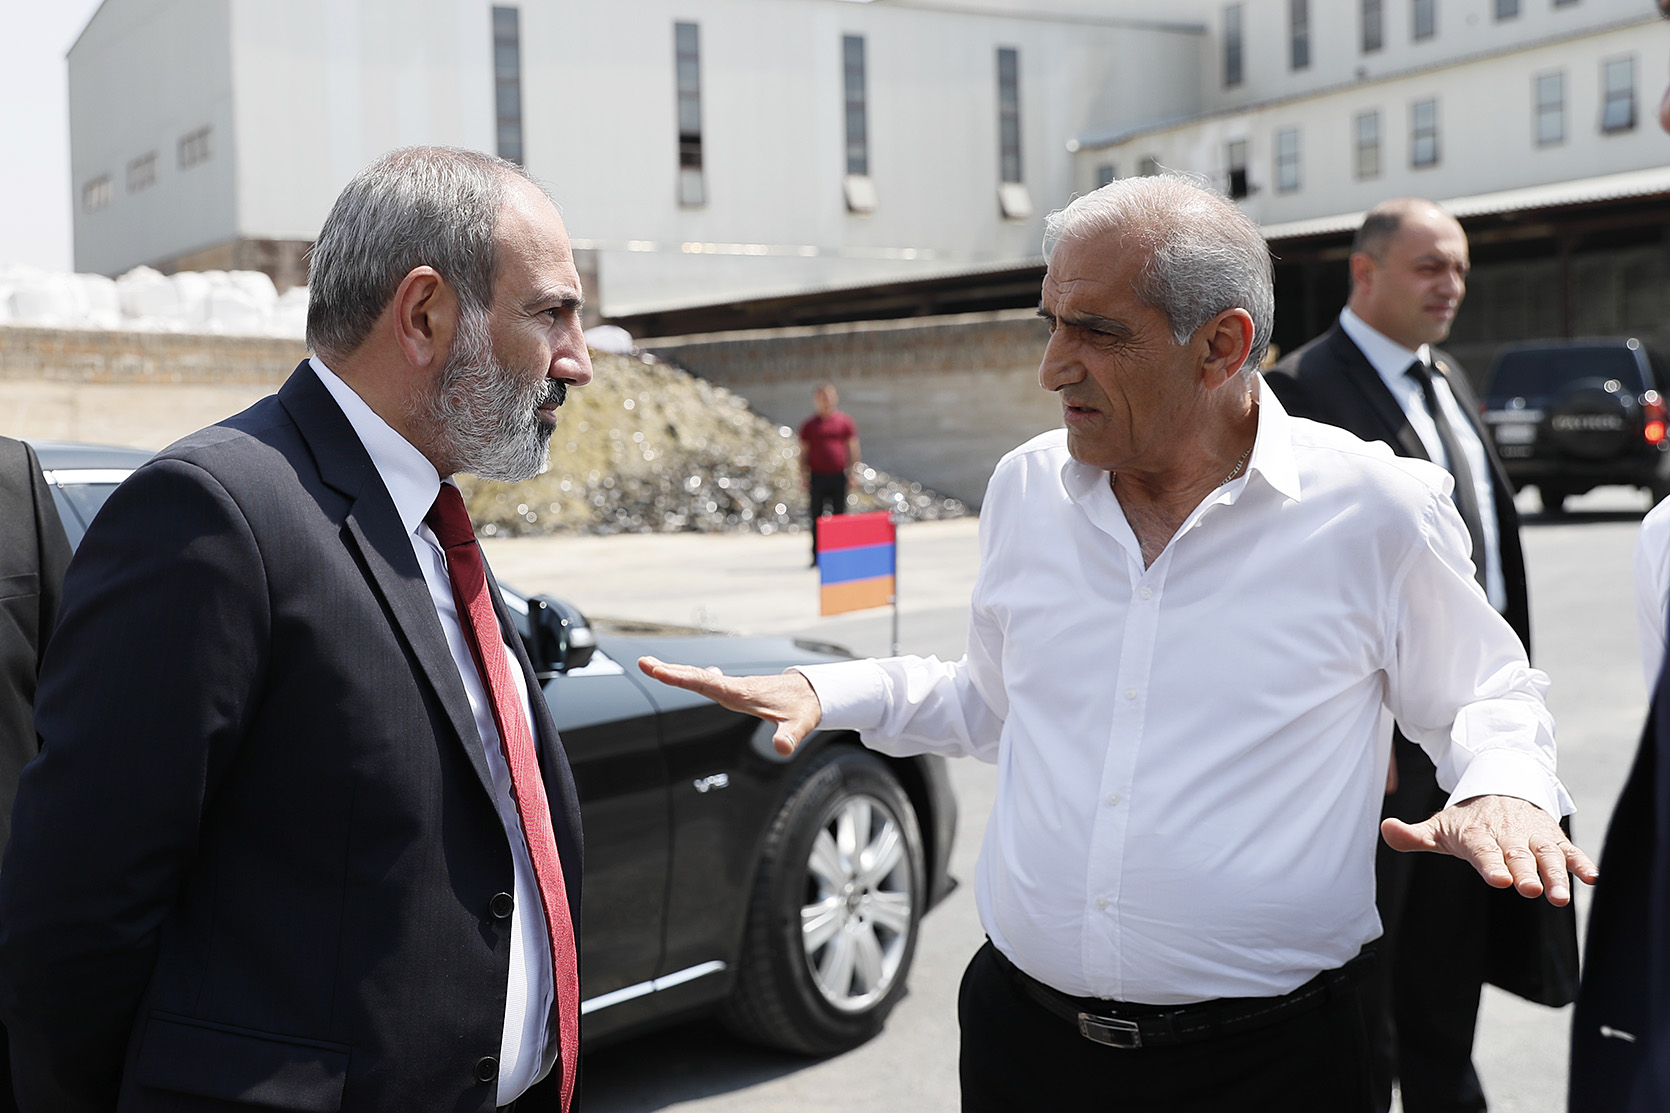 Nikol Pashinyan familiarized with glass production process at Saranist enterprise; briefed on new brandy factory operations